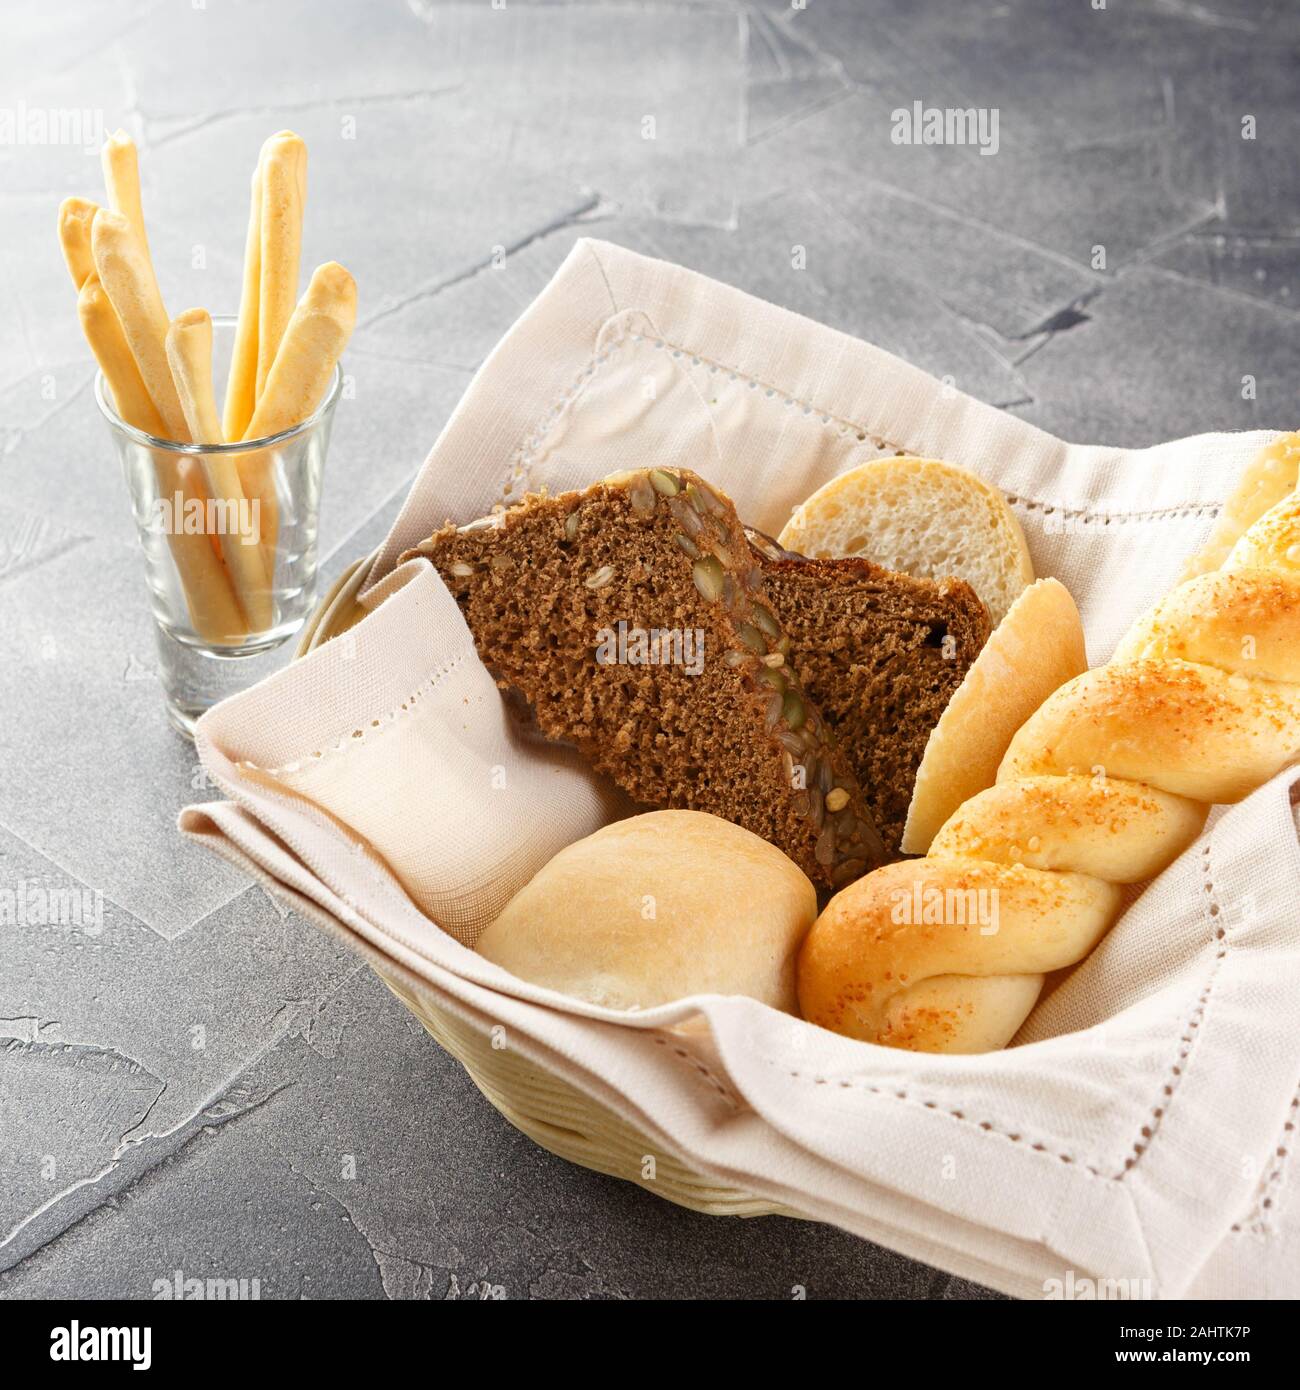 Bread basket in restaurant, freshly baked food. French pastry concept. Set of different kinds of bread and pastry. Stock Photo